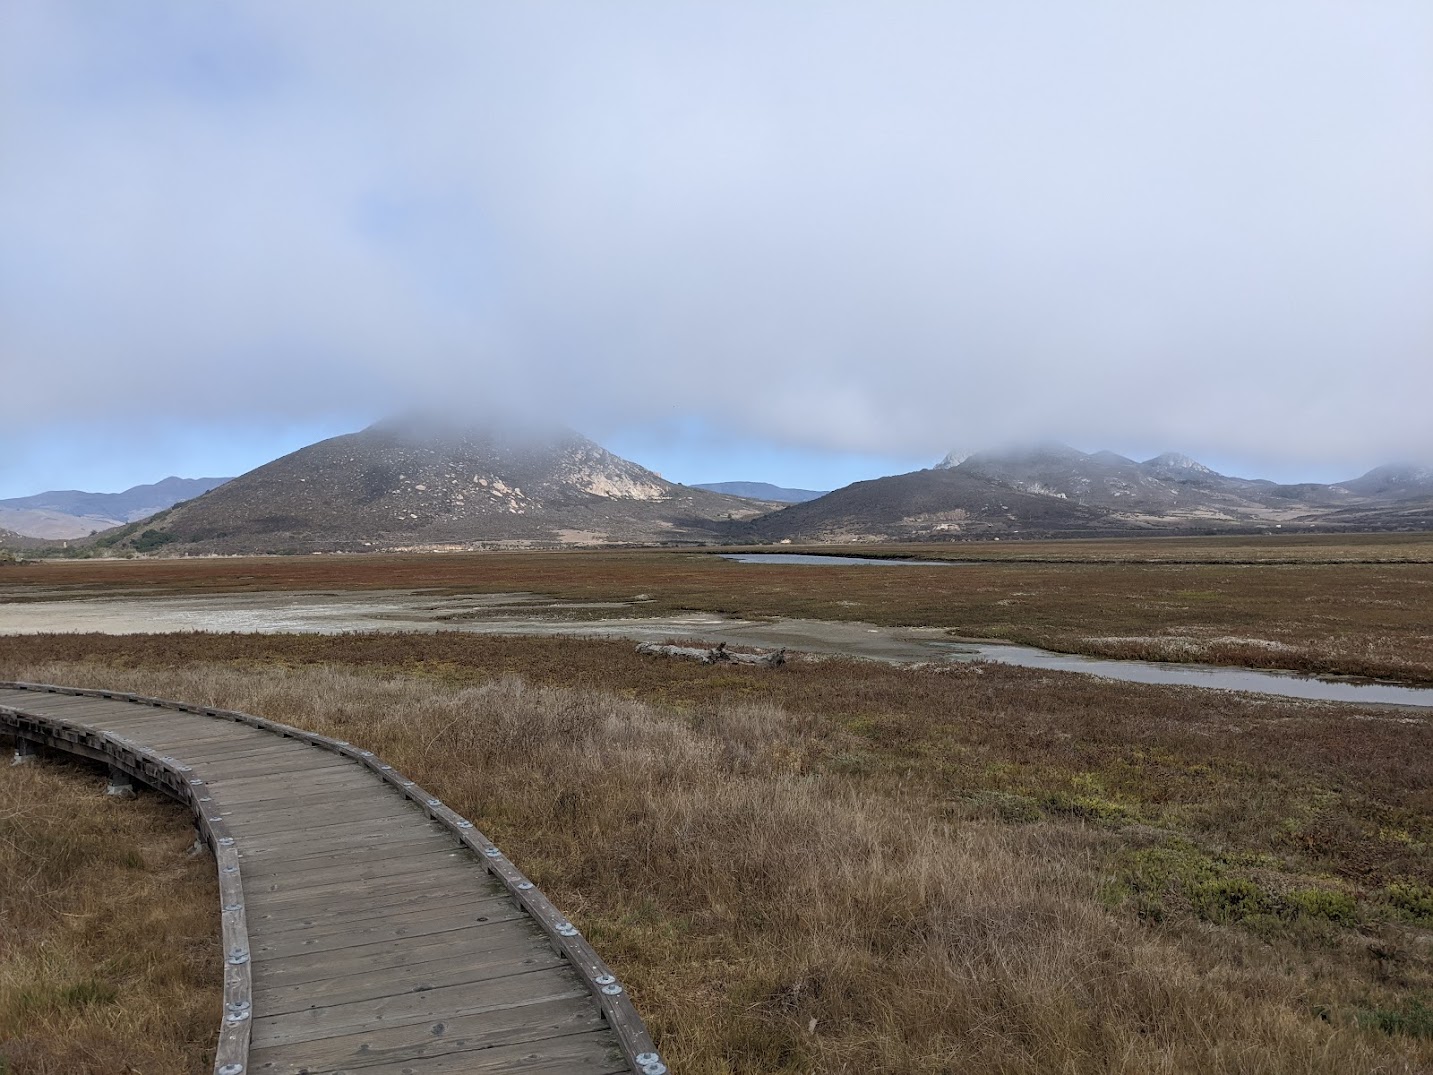 A boardwalk in the foreground curves off to the left. In the far distance, hills have their tops shrouded in fog. In between are salt flats: very short vegetation with patches of water visible in between